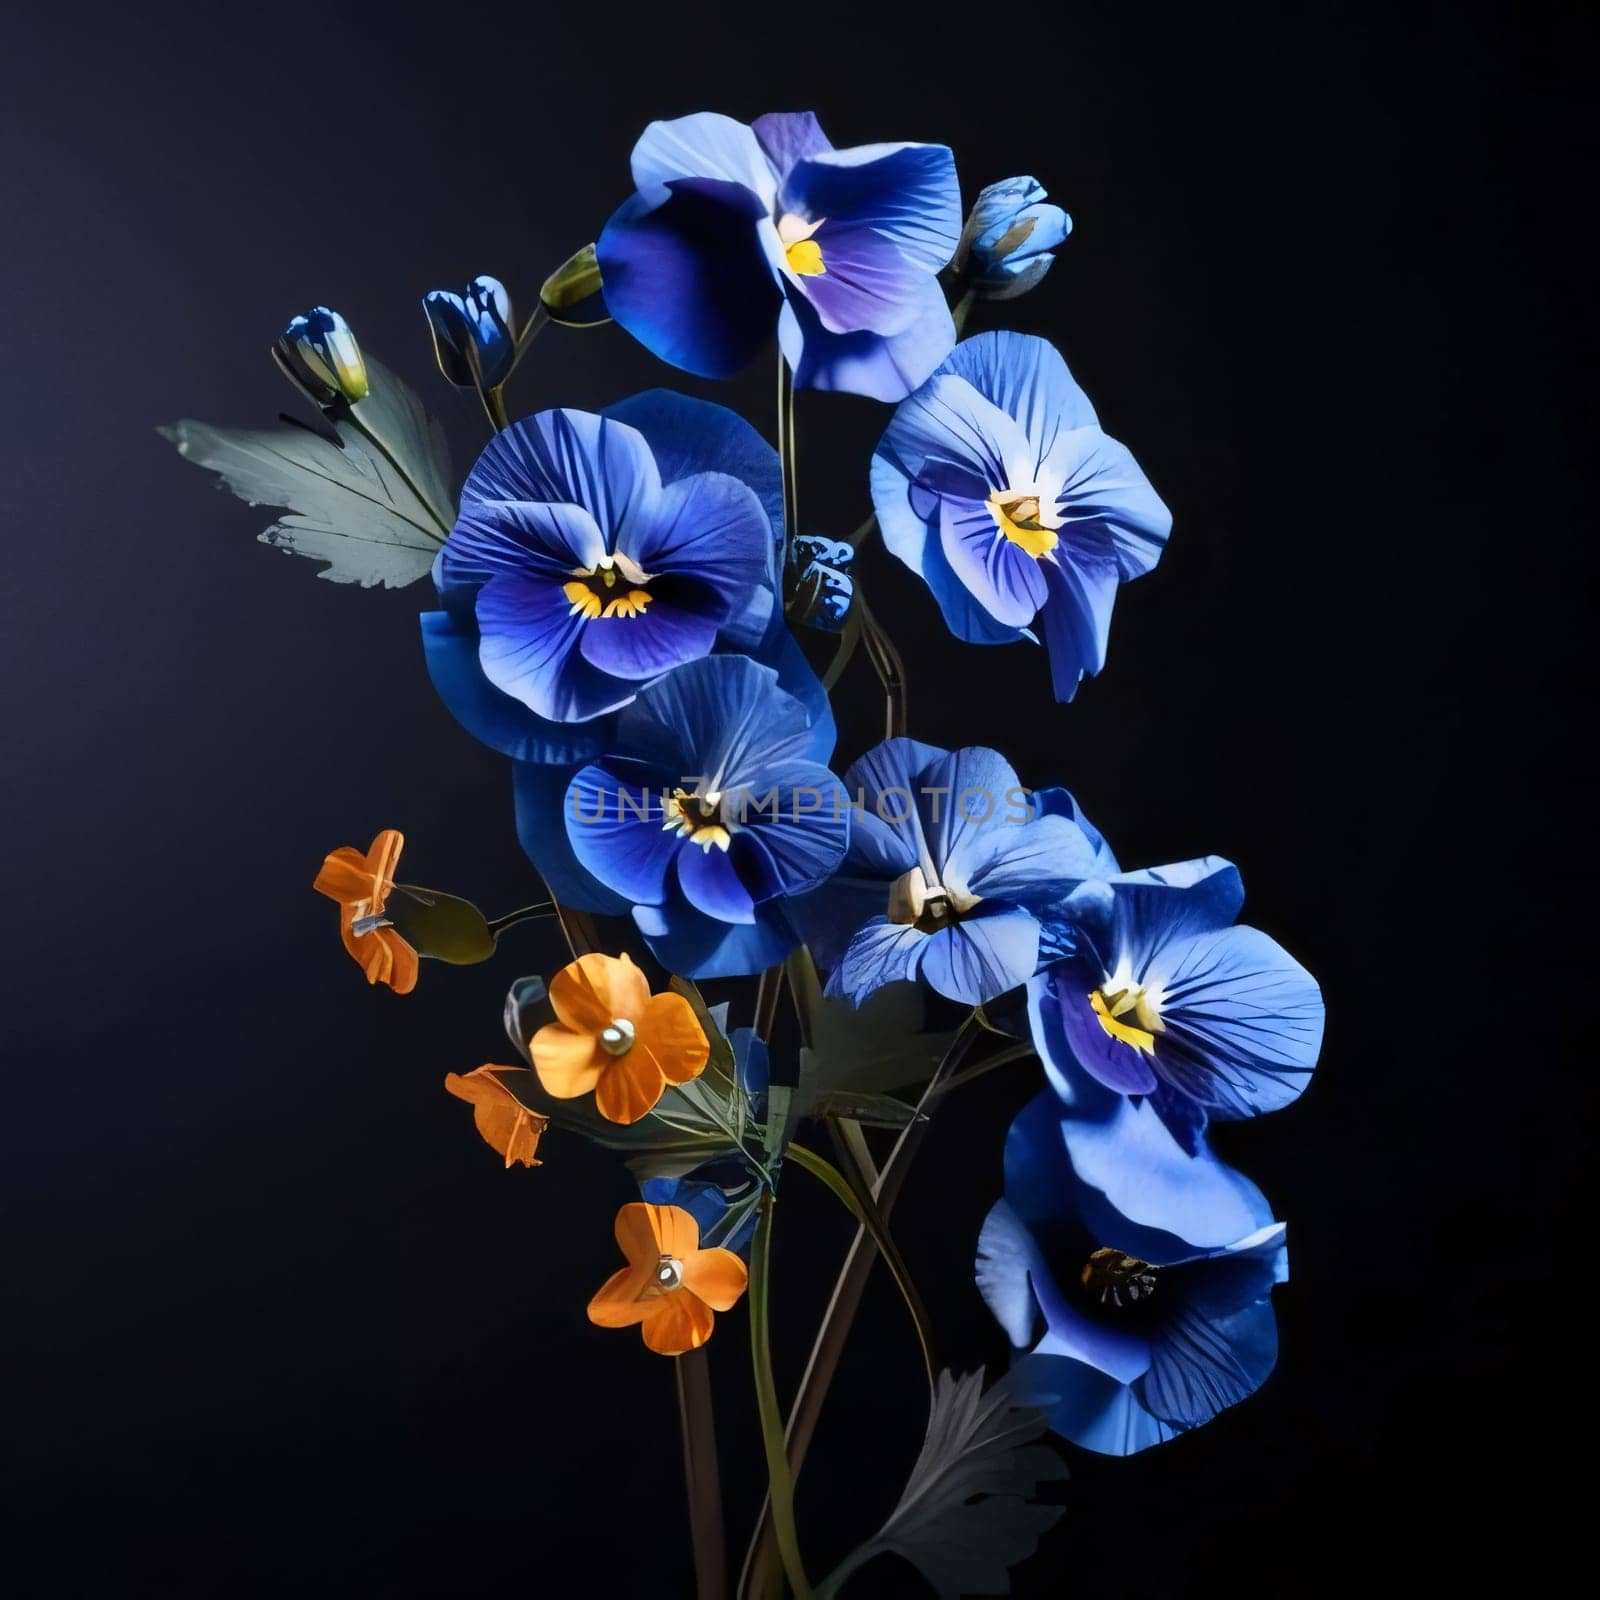 Blue flowers - pansies on a dark black isolated background. Flowering flowers, a symbol of spring, new life. by ThemesS